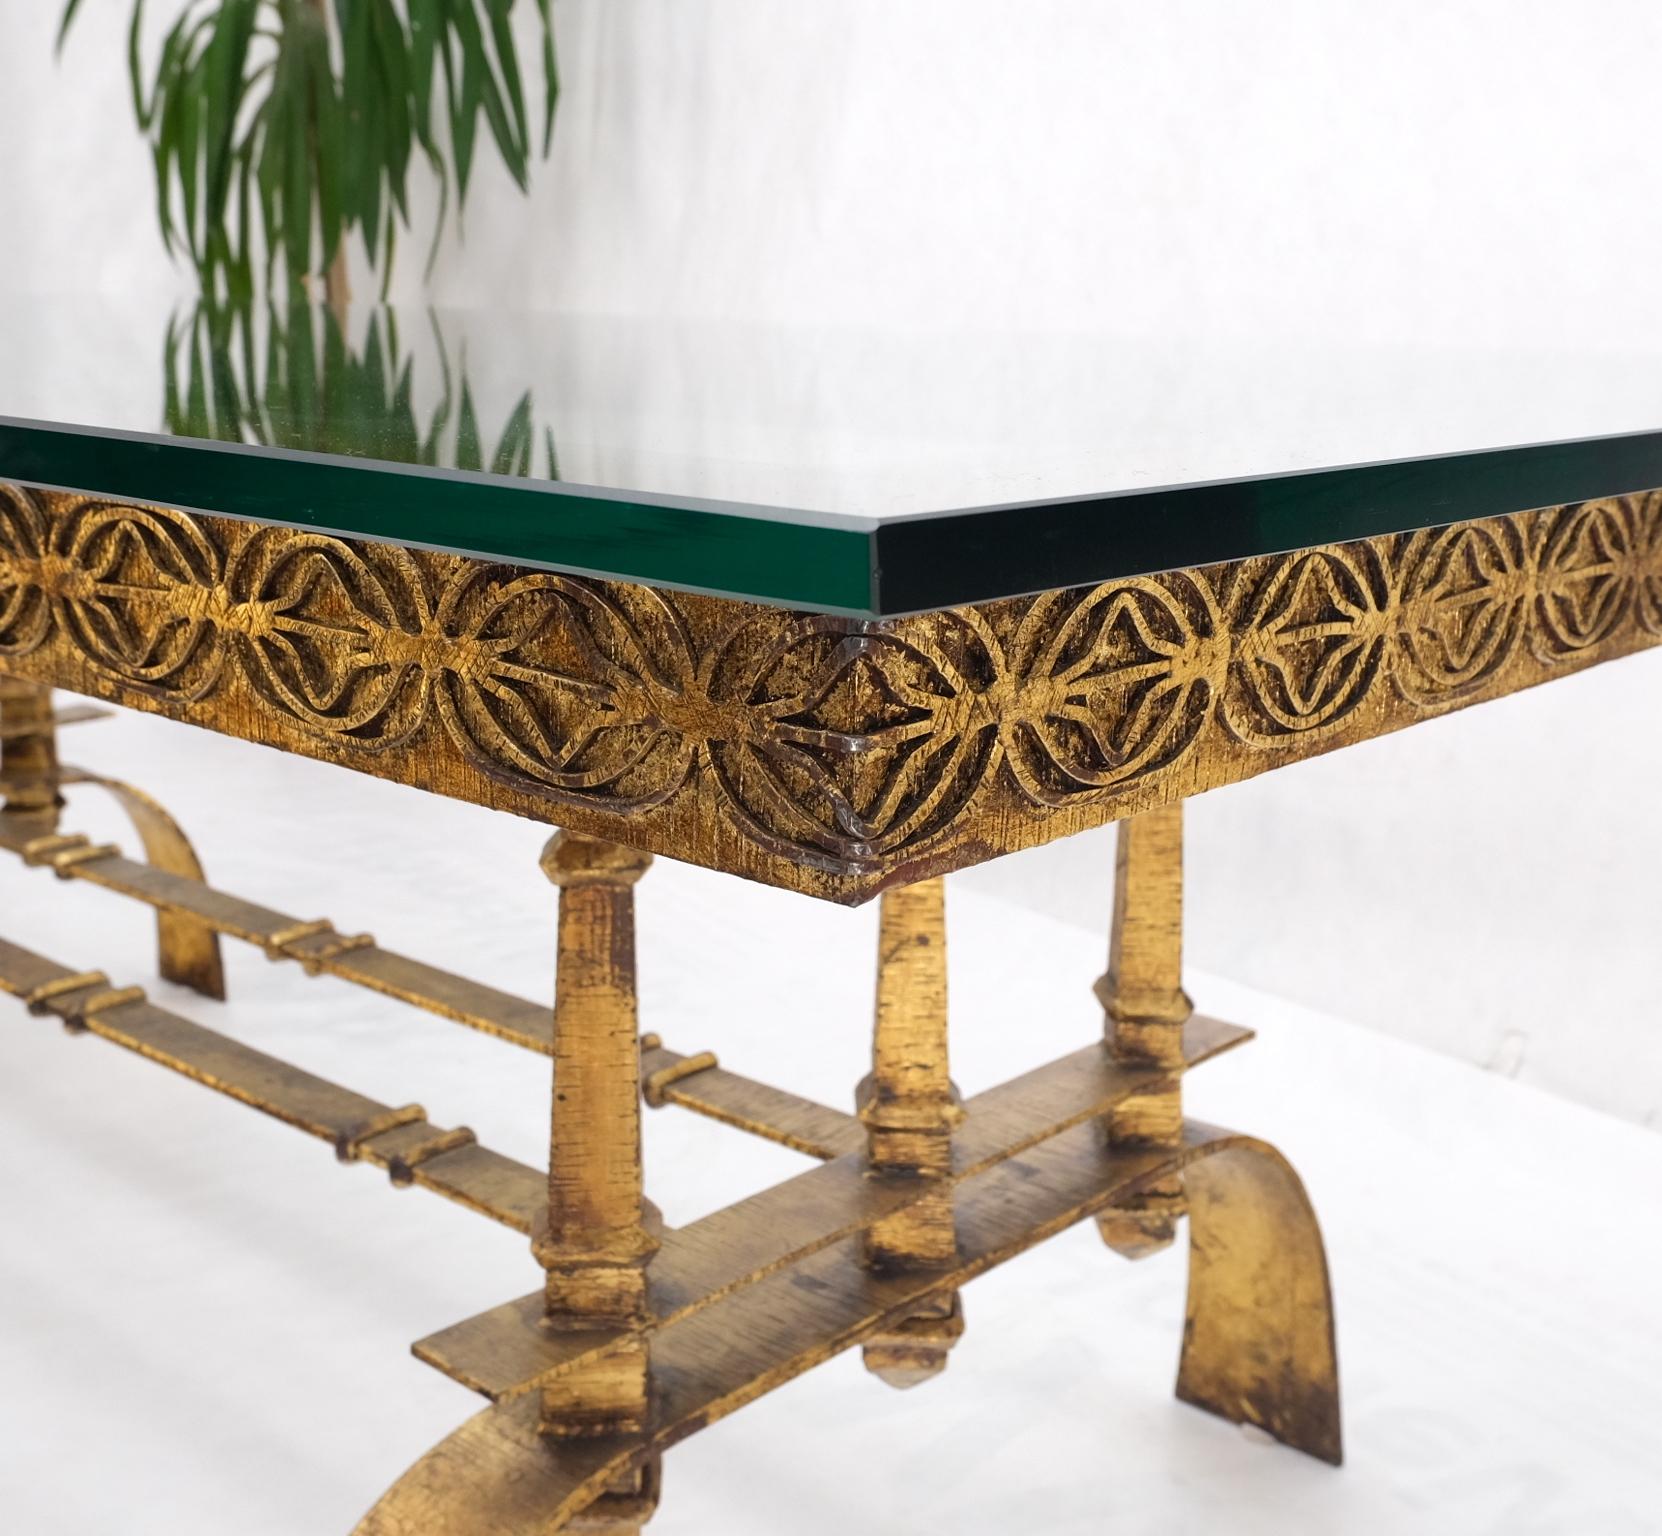 Heavy gold gilt metal base large rectangle dining table Hollywood Regency mint!
Paul Evans decor match.
Glass measures 3/4''thick.